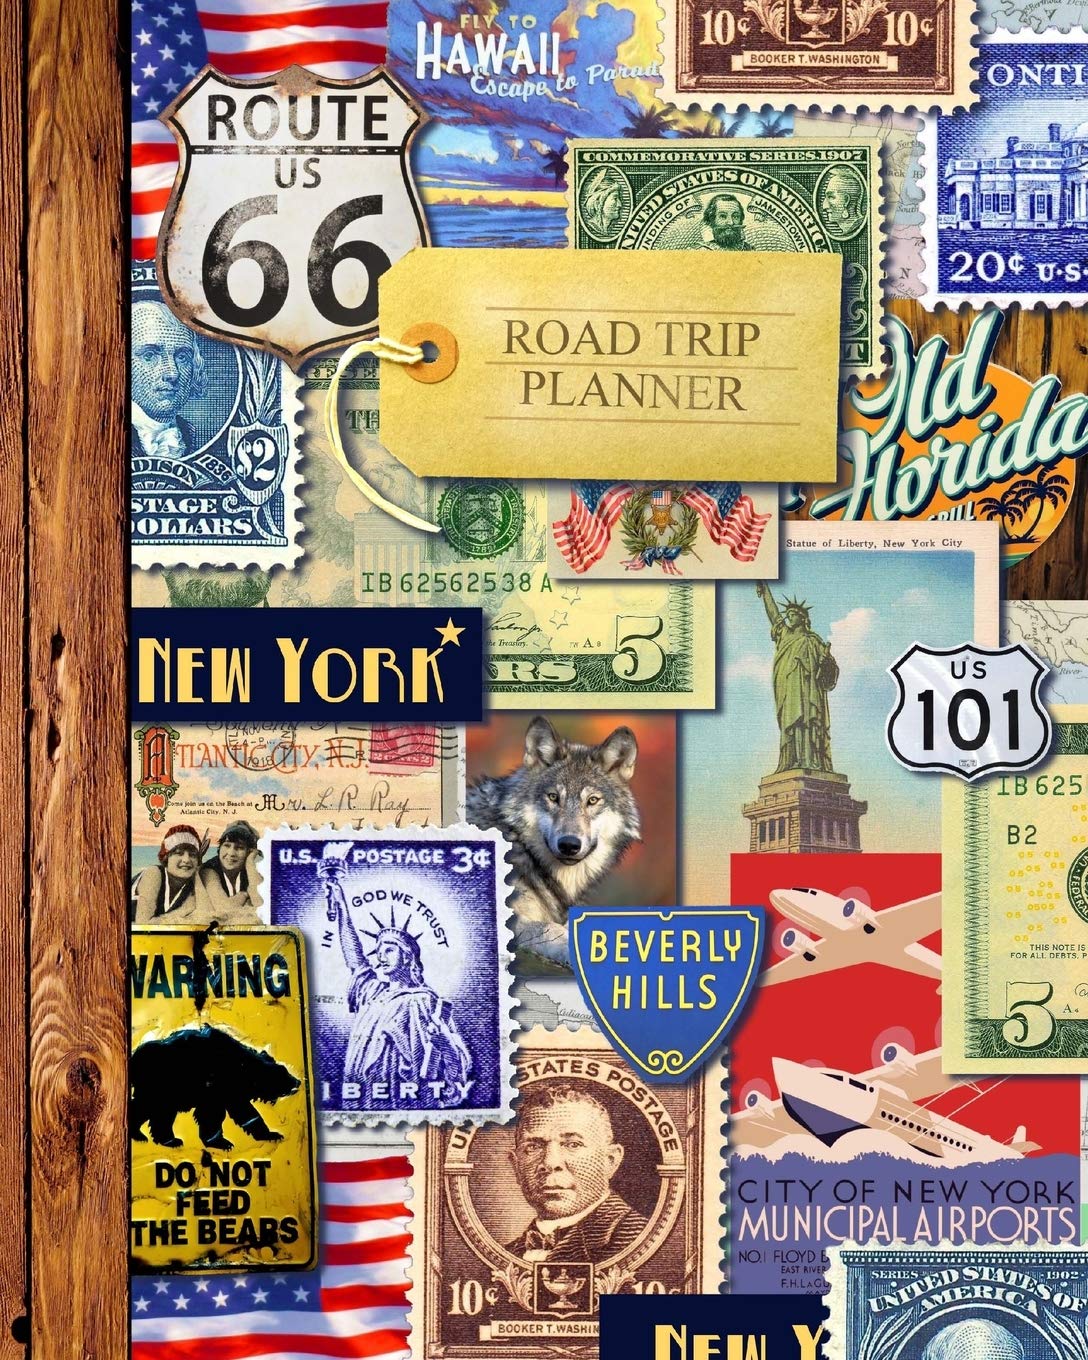 Road Trip Planner: Vacation Planner & Travel Journal / Diary for 4 Trips, with Checklists, Itinerary & more [ Softback * Large (8” x 10”) * American Roadtrip ] (Travel Gifts)